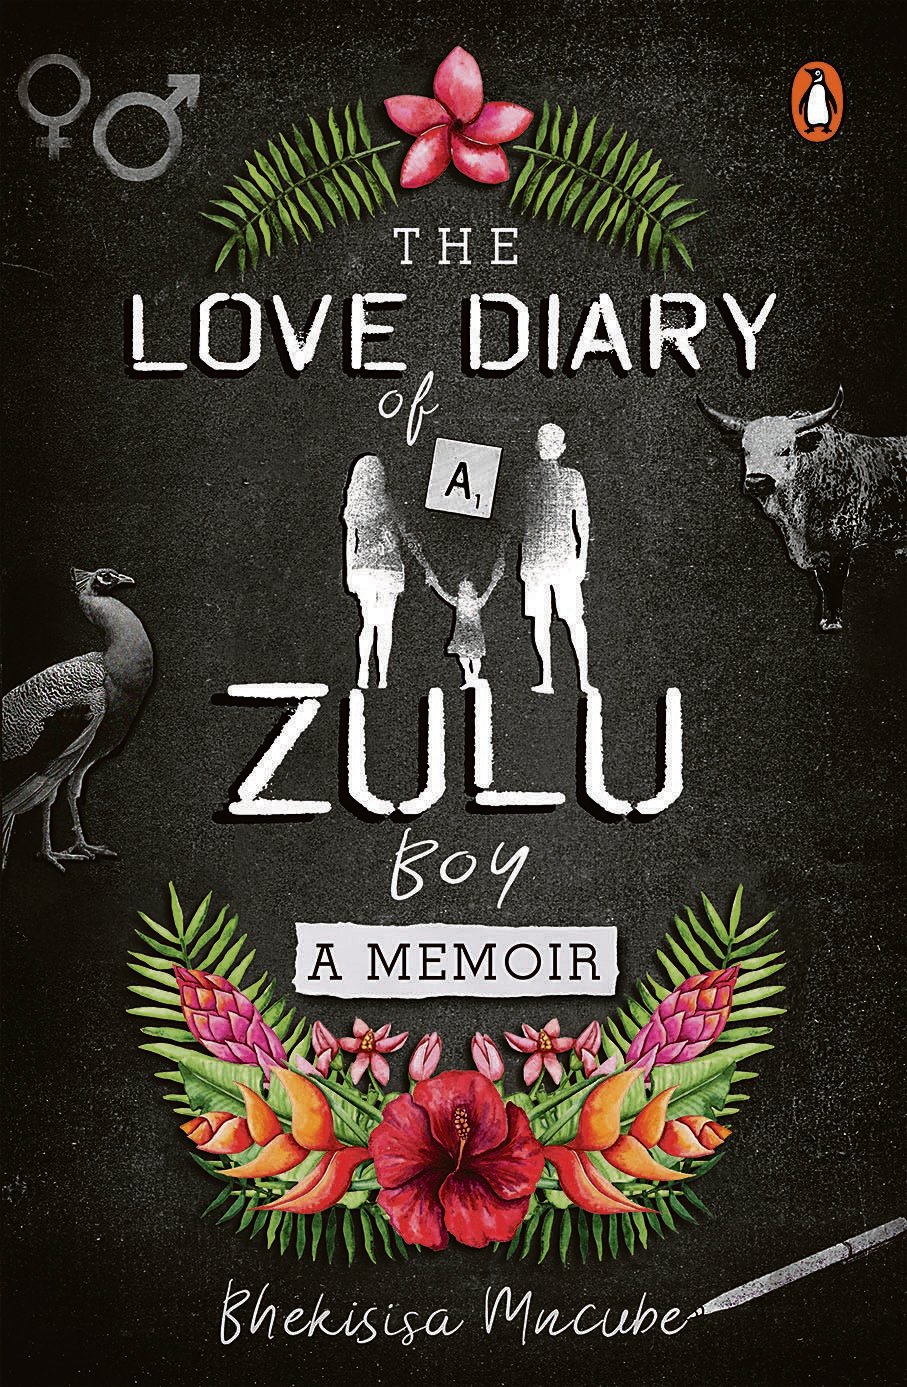 The Love Diary of a Zulu Boy by Bhekisisa Mncube